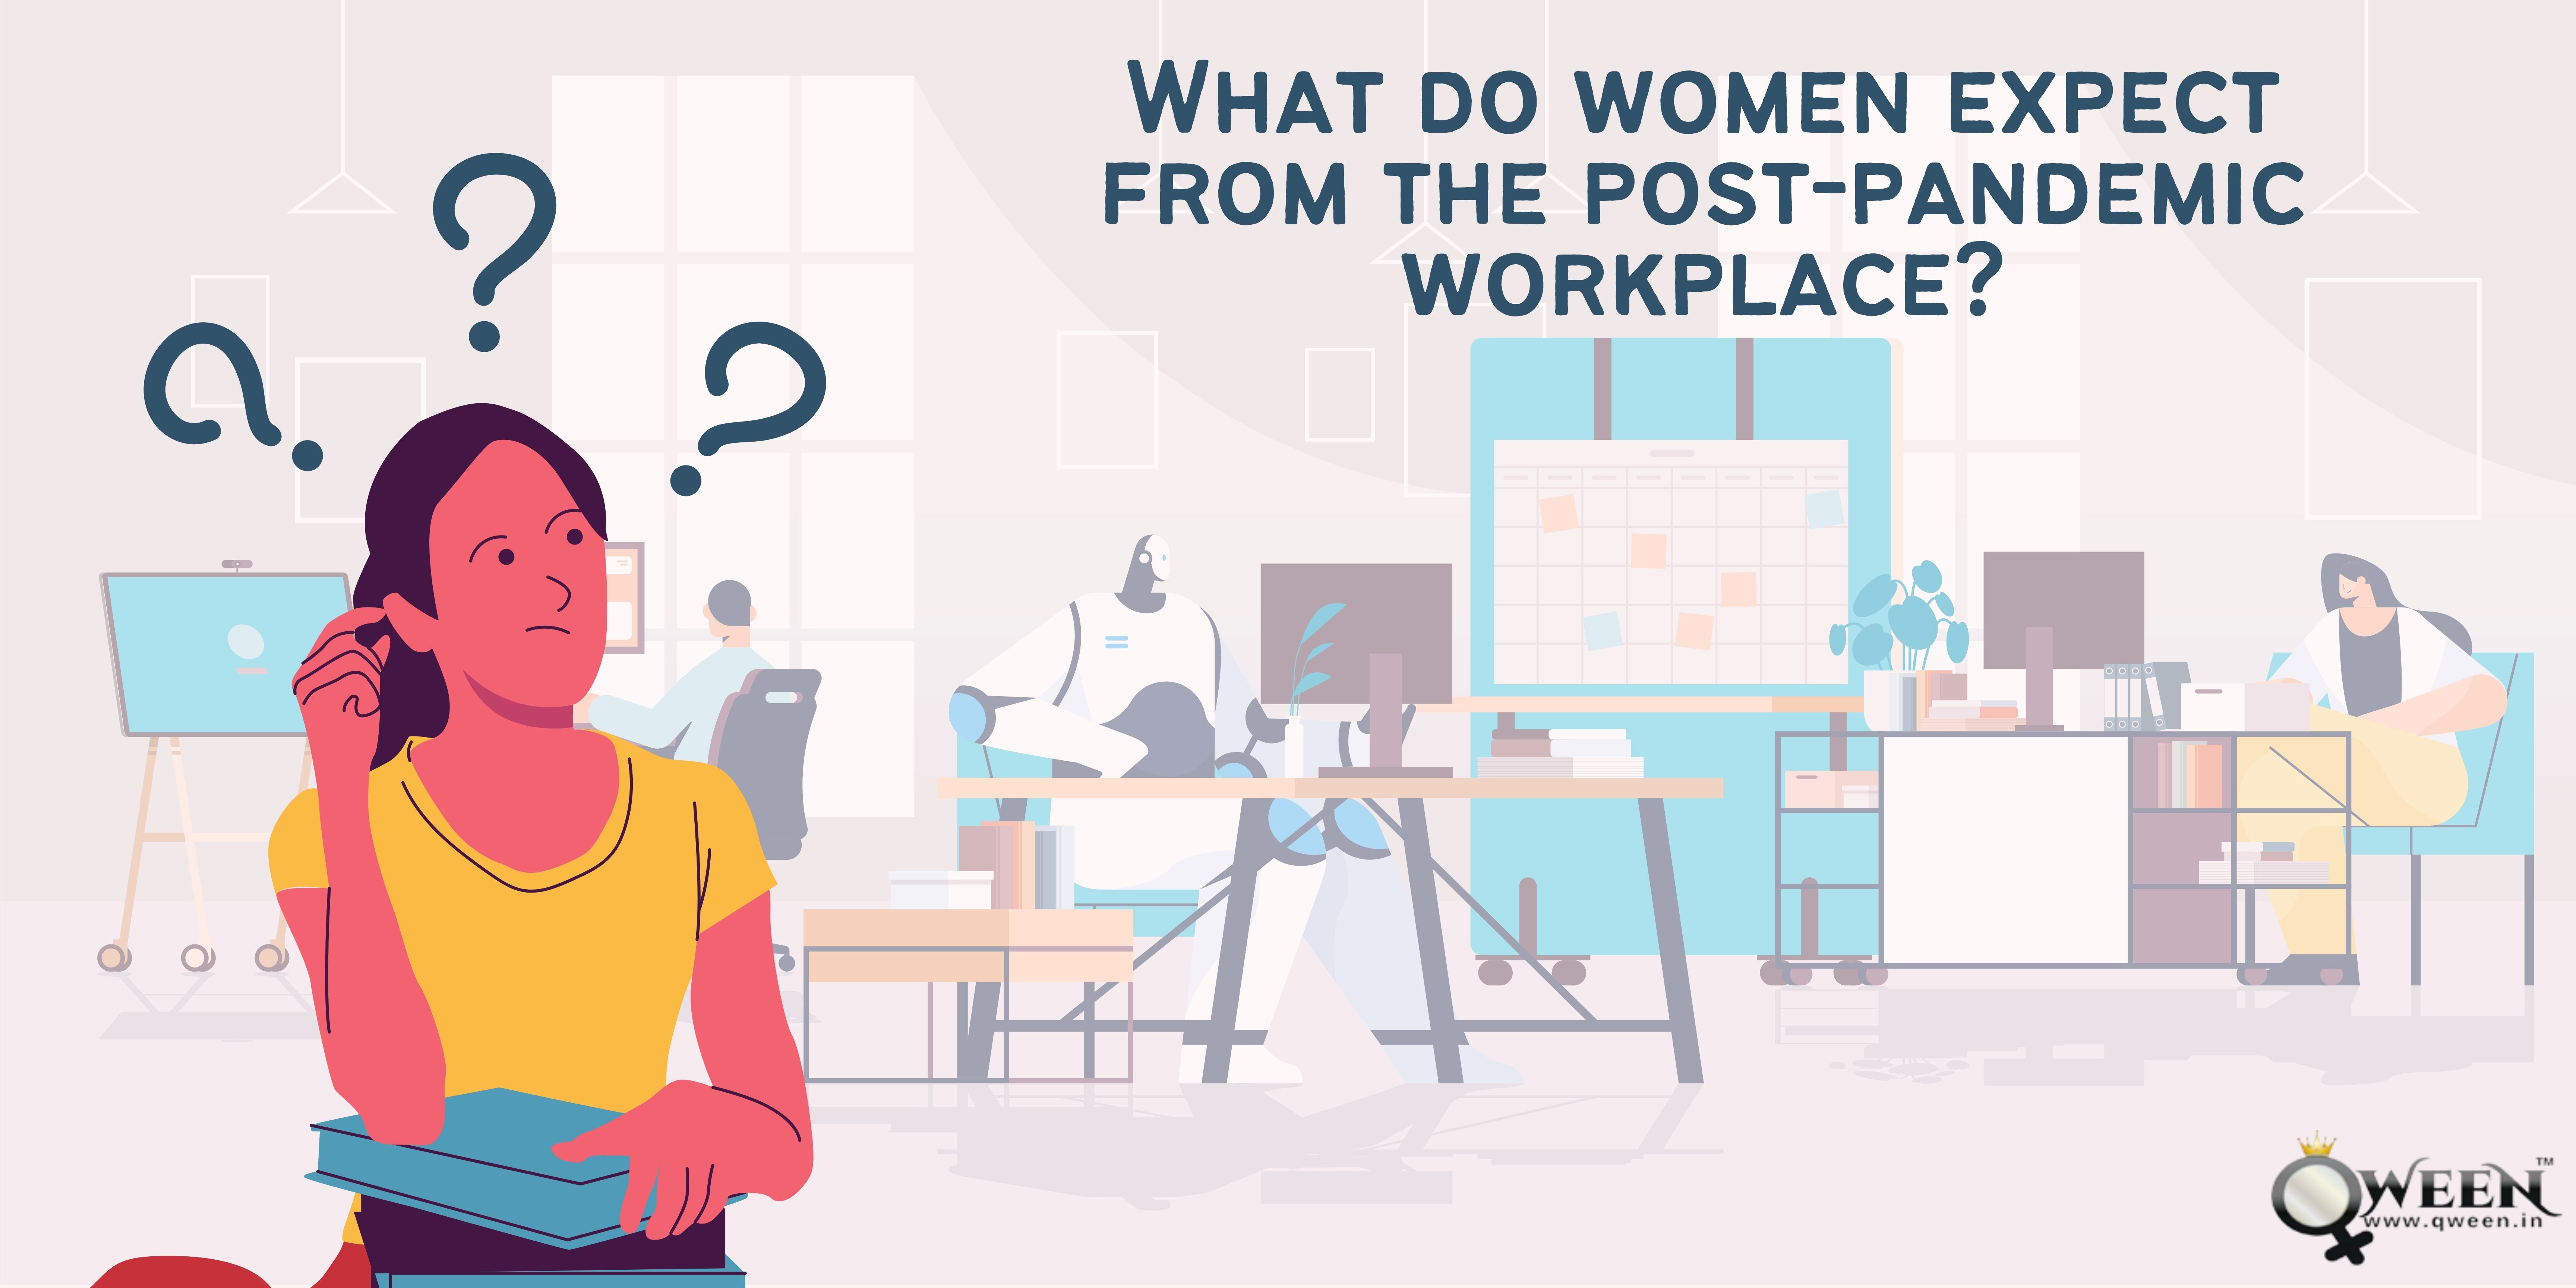 What do women expect from the post-pandemic workplace?